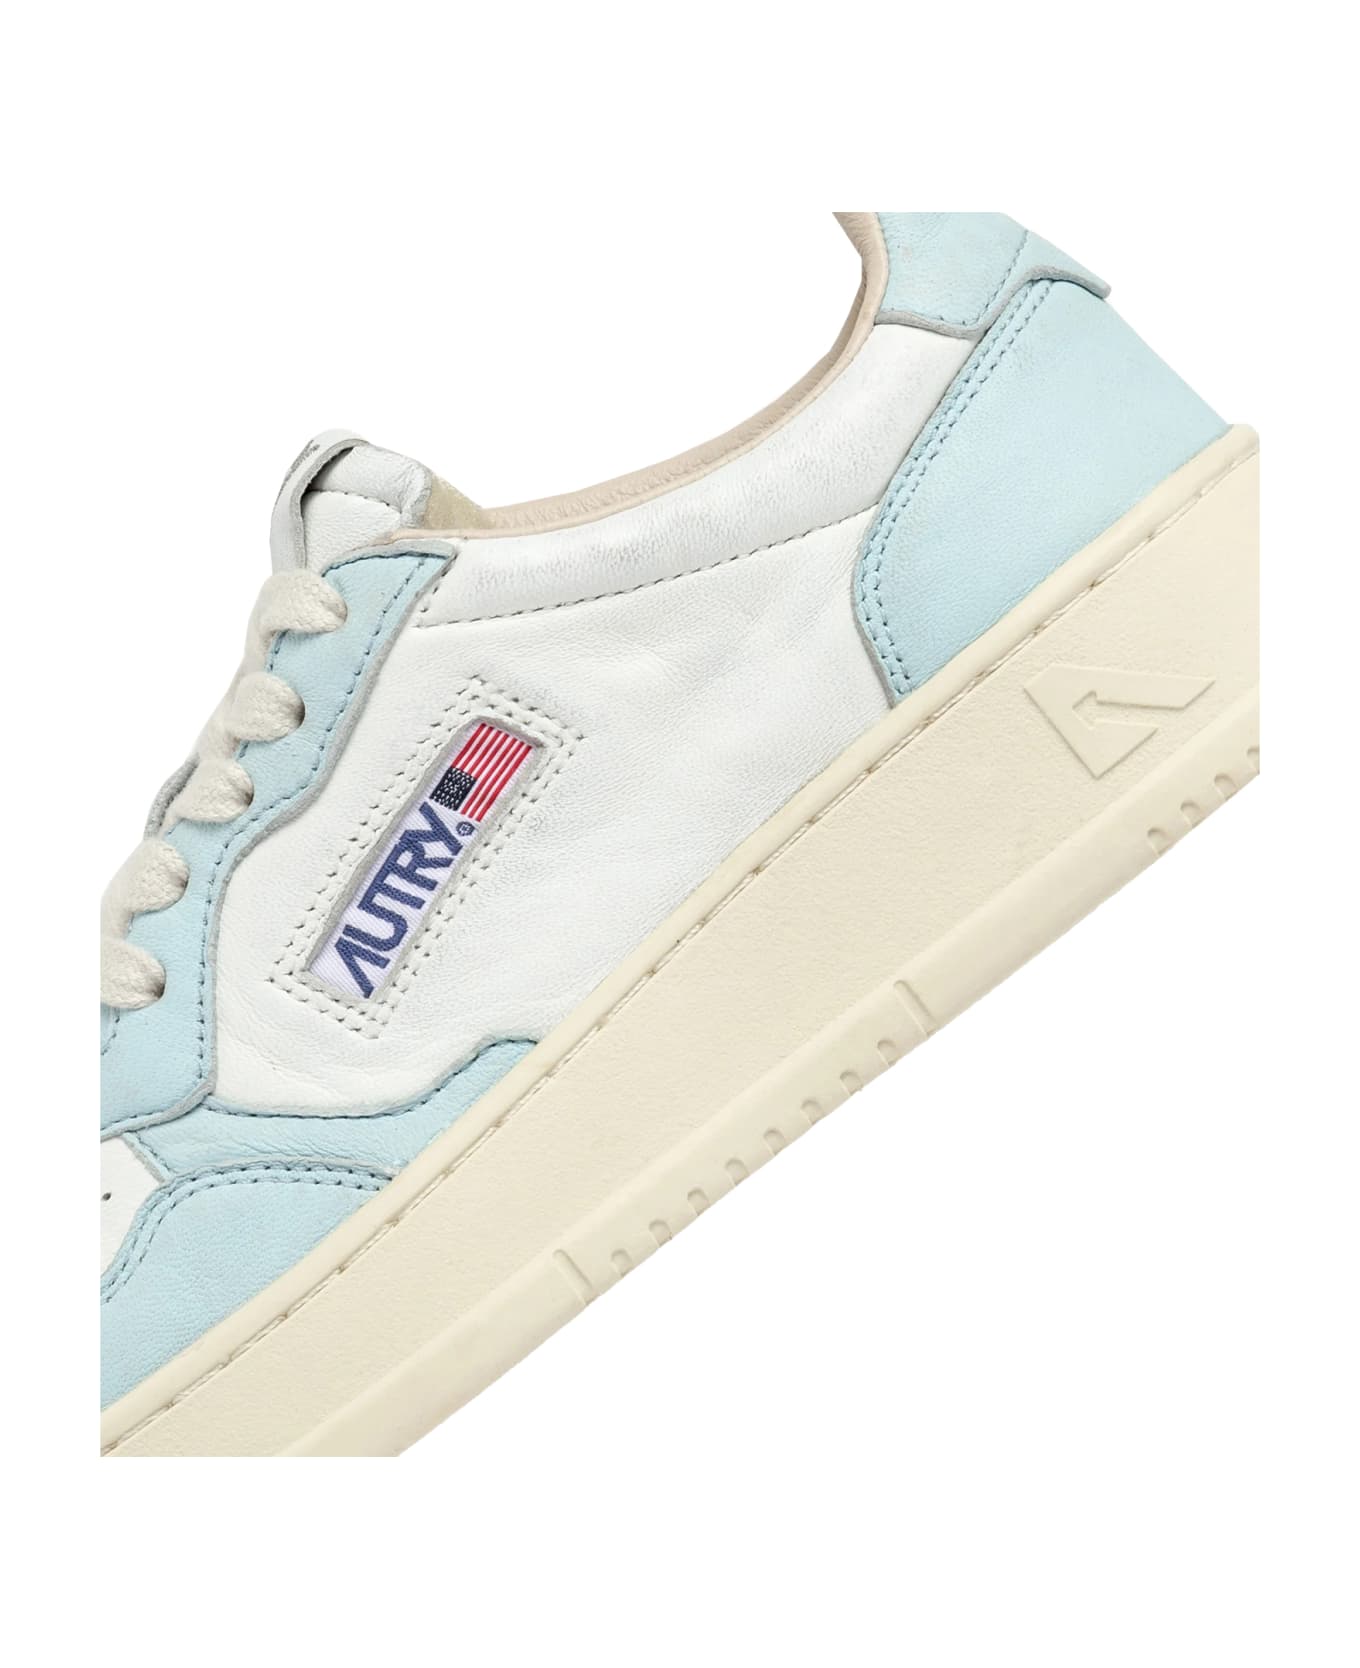 Autry Sneakers Medalist Low - Clear Blue